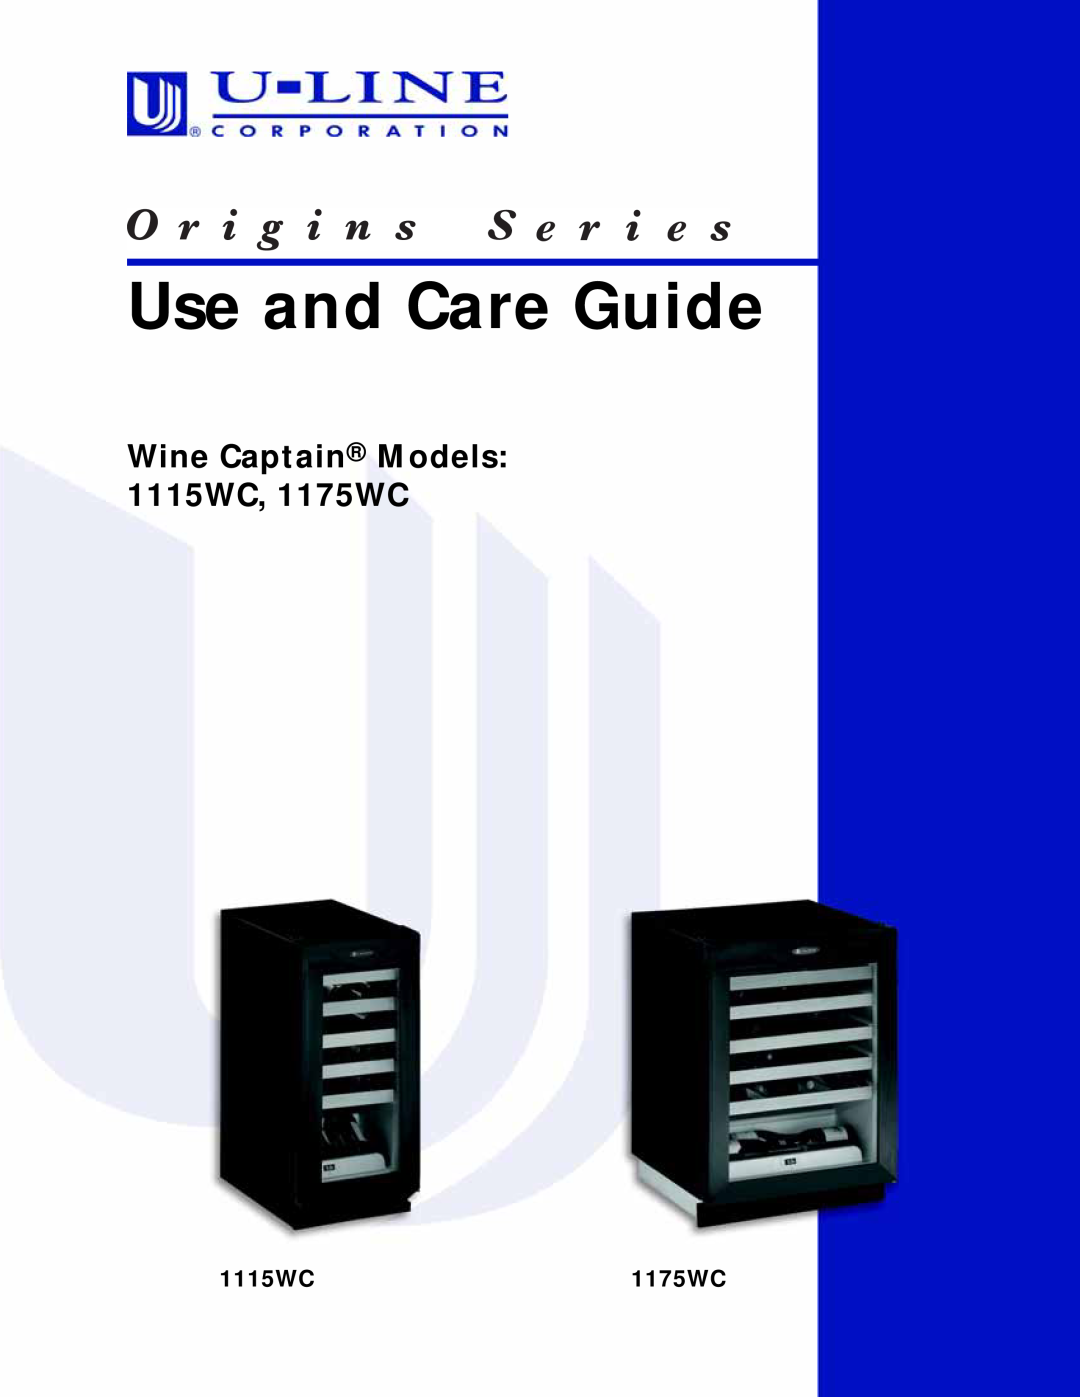 U-Line 1115WC manual 111 5 W C, W I N E C A P Ta I N M O D E L S, Features, Series 